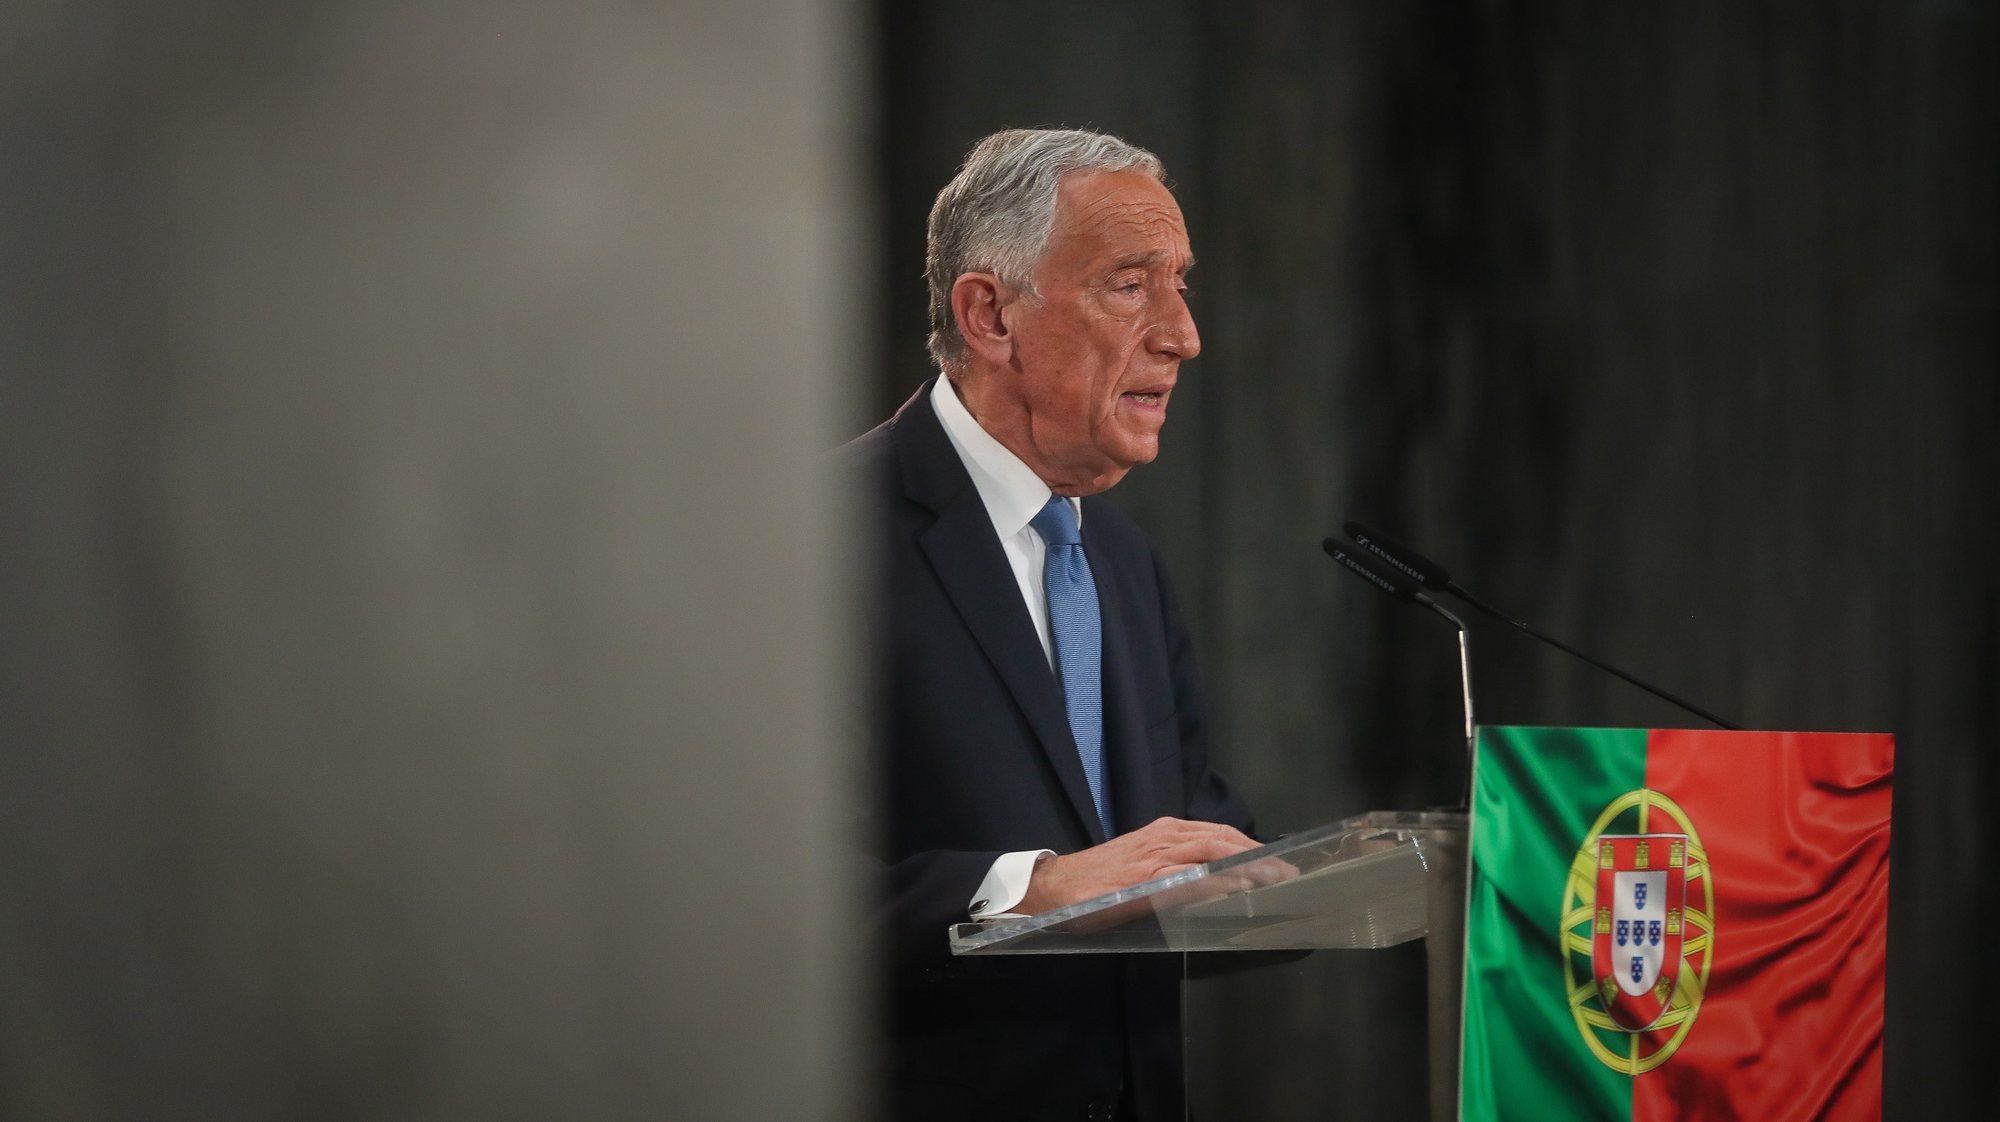 epa08963350 Presidential candidate, Marcelo Rebelo de Sousa, delivers his victory speech for being re-elected as Portugal&#039;s President after winning the 2021 presidential elections, in Lisbon, Portugal, 24 January 2021. Marcelo Rebelo de Sousa won Portugal&#039;s presidential election with a majority of the vote in the first round, according to the election commission.  EPA/MARIO CRUZ